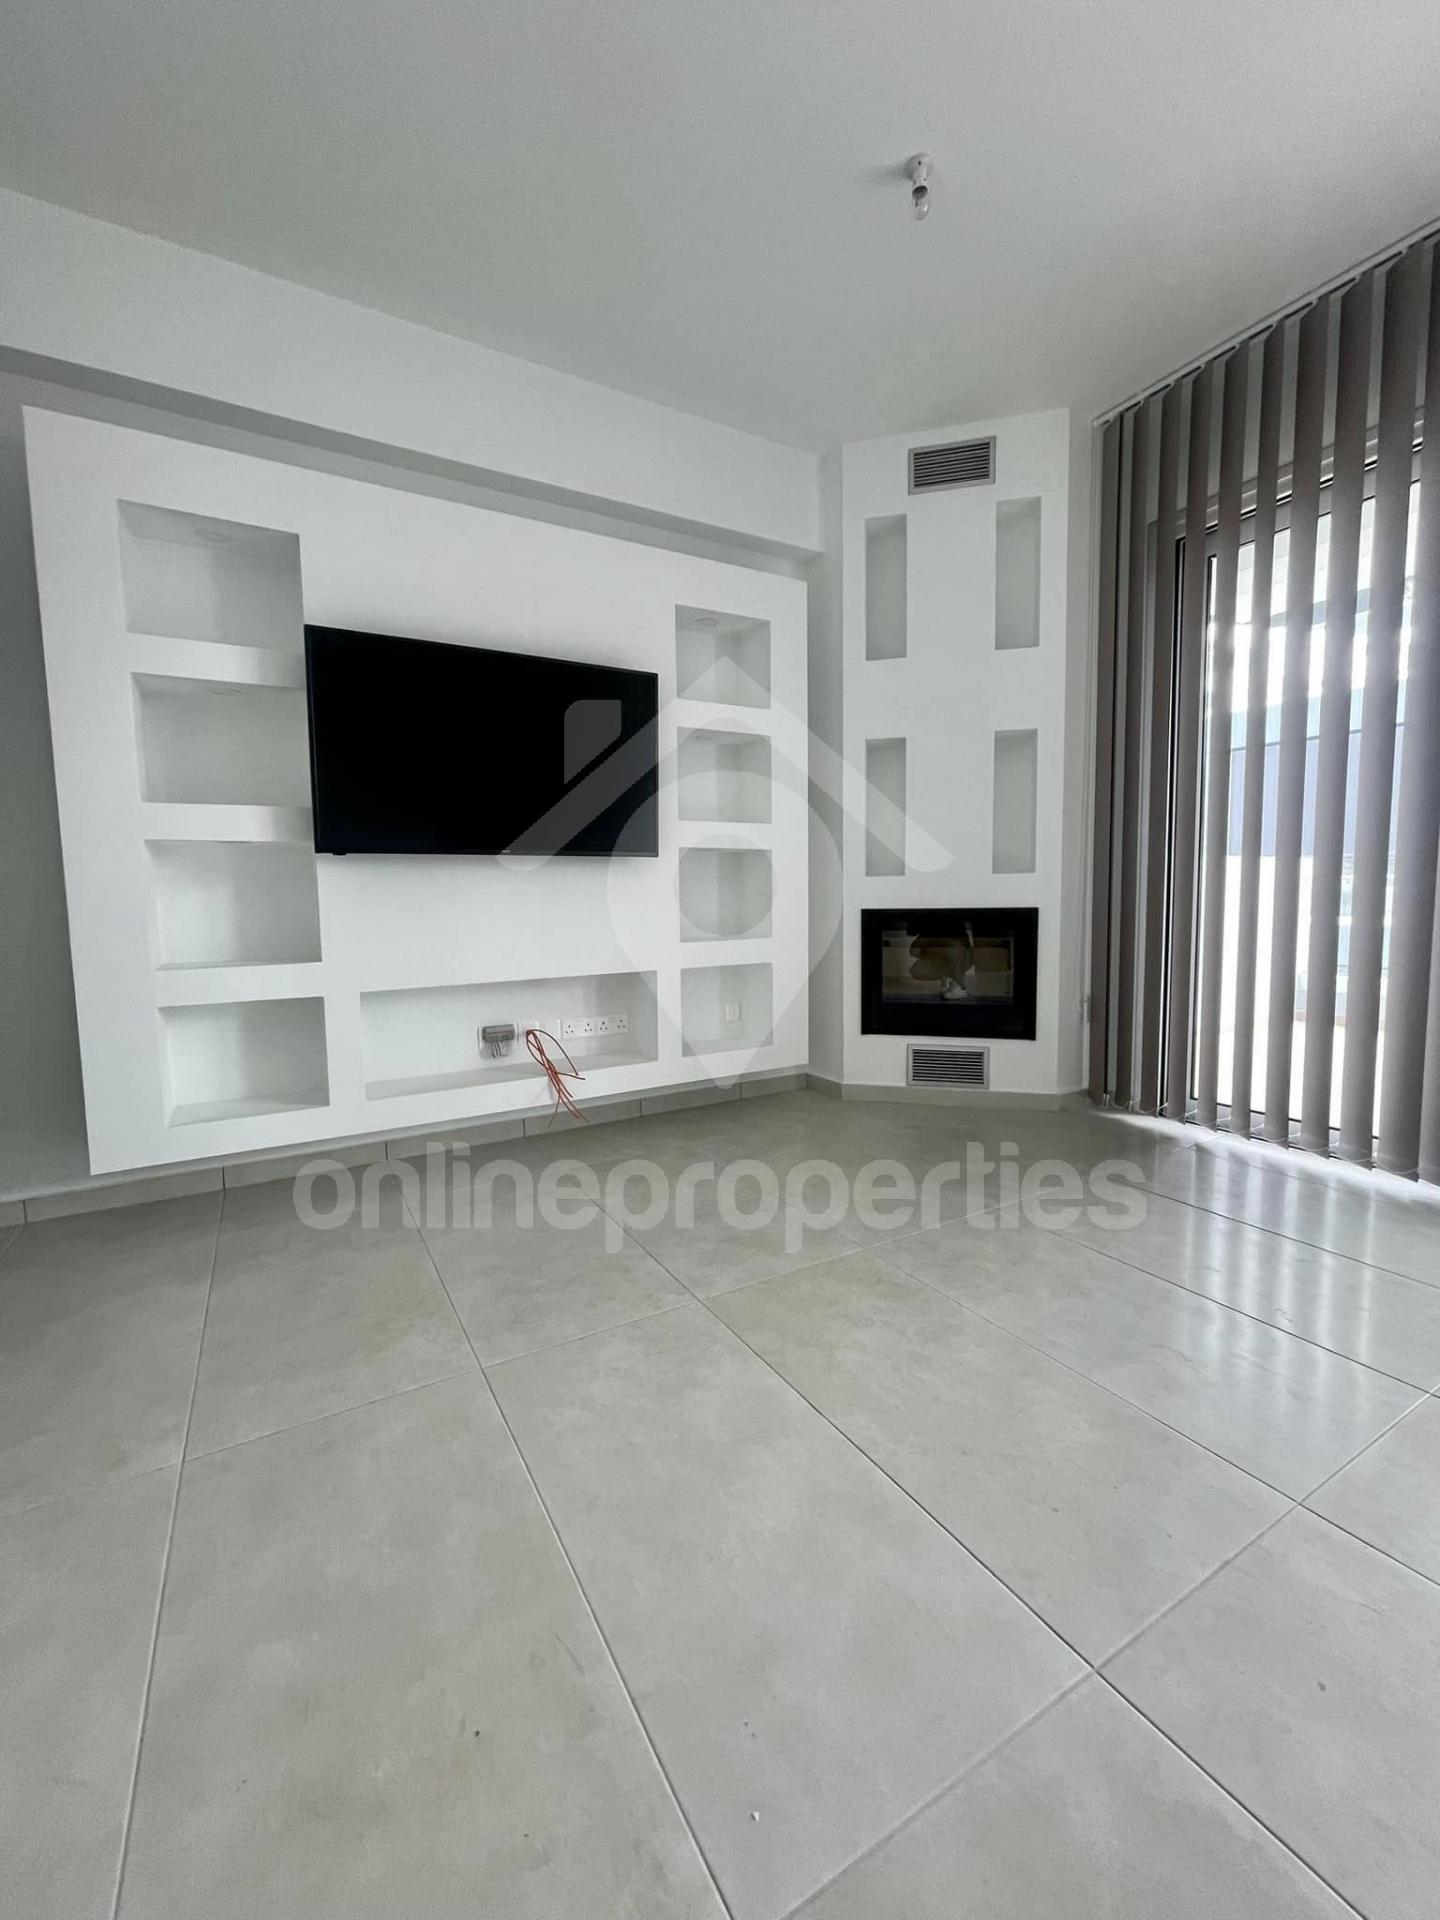 Luxurious 3 bedroom flat with a private roof garden